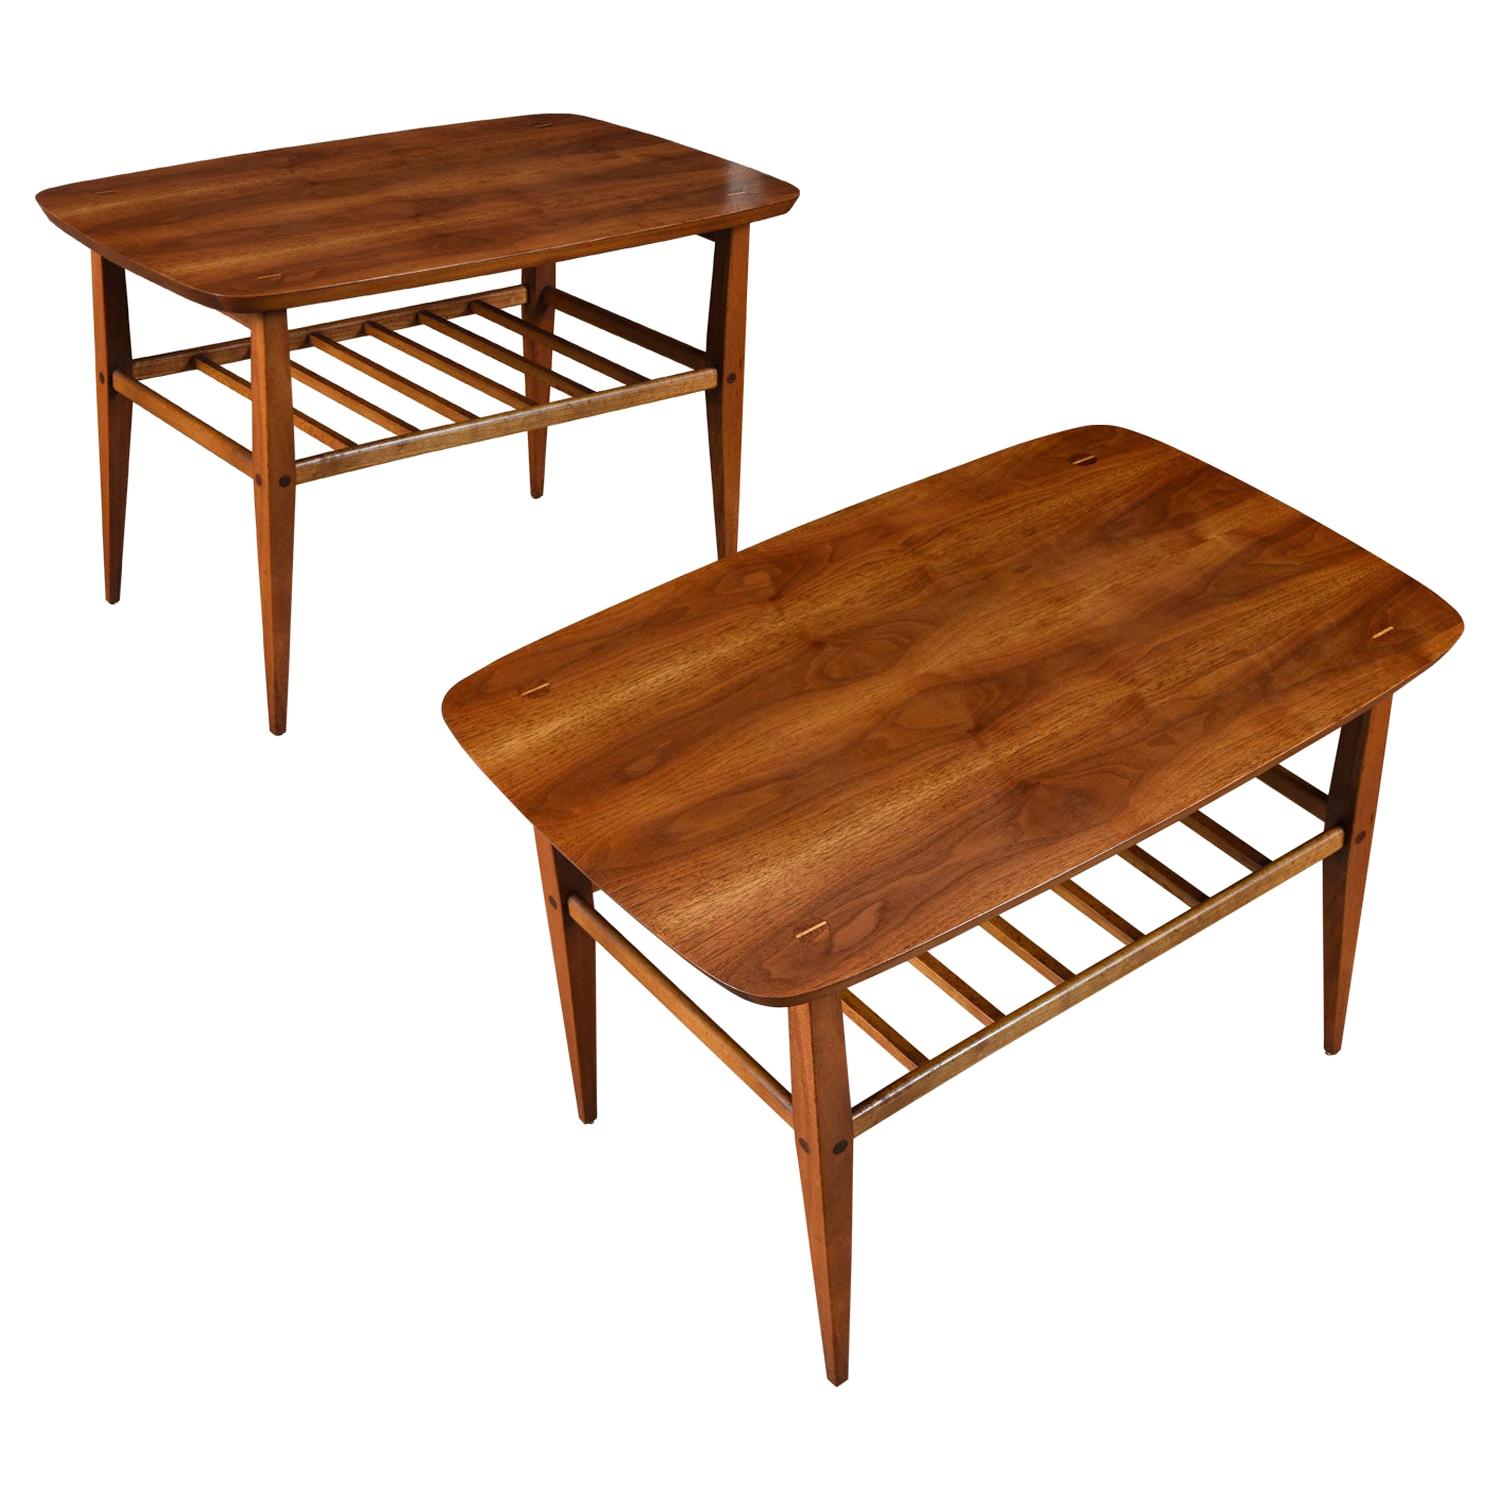 Restored Mid-Century Modern Lane Accent Tiered Walnut End Tables